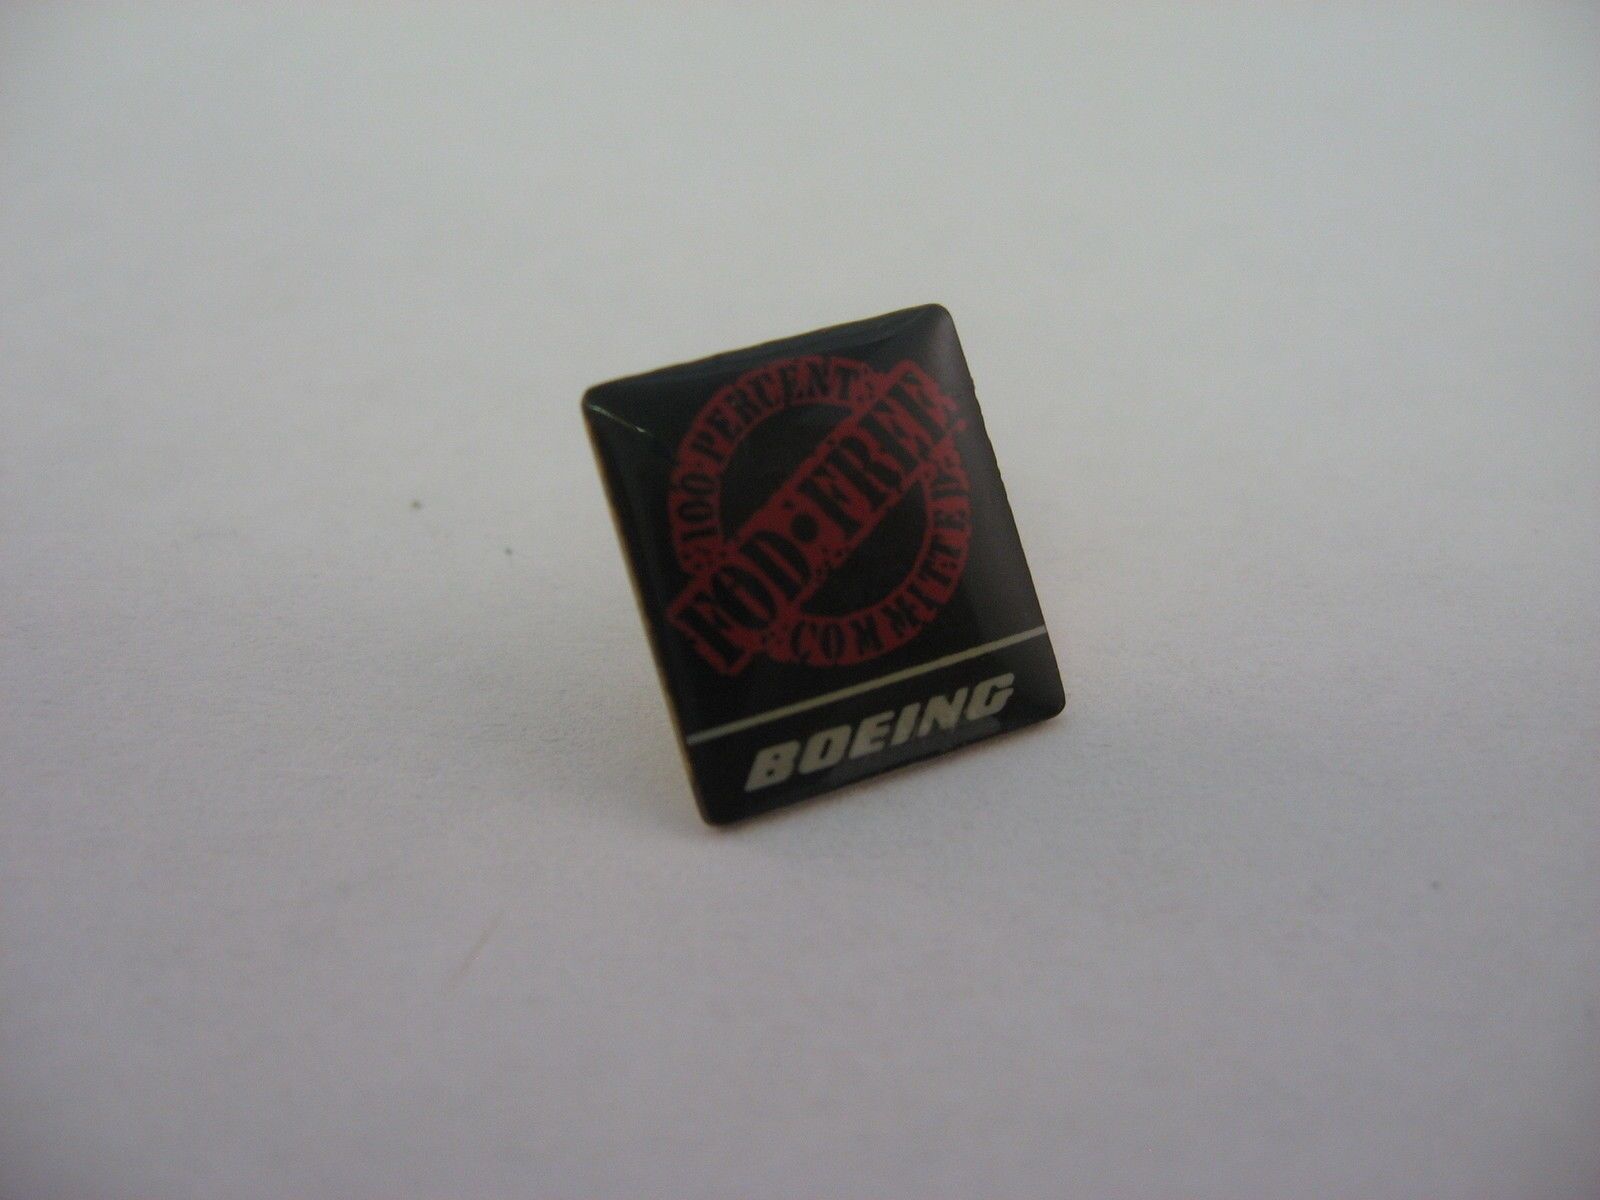 Rare Vintage BOEING 100% Committed FOD FREE Advertising Pin Award